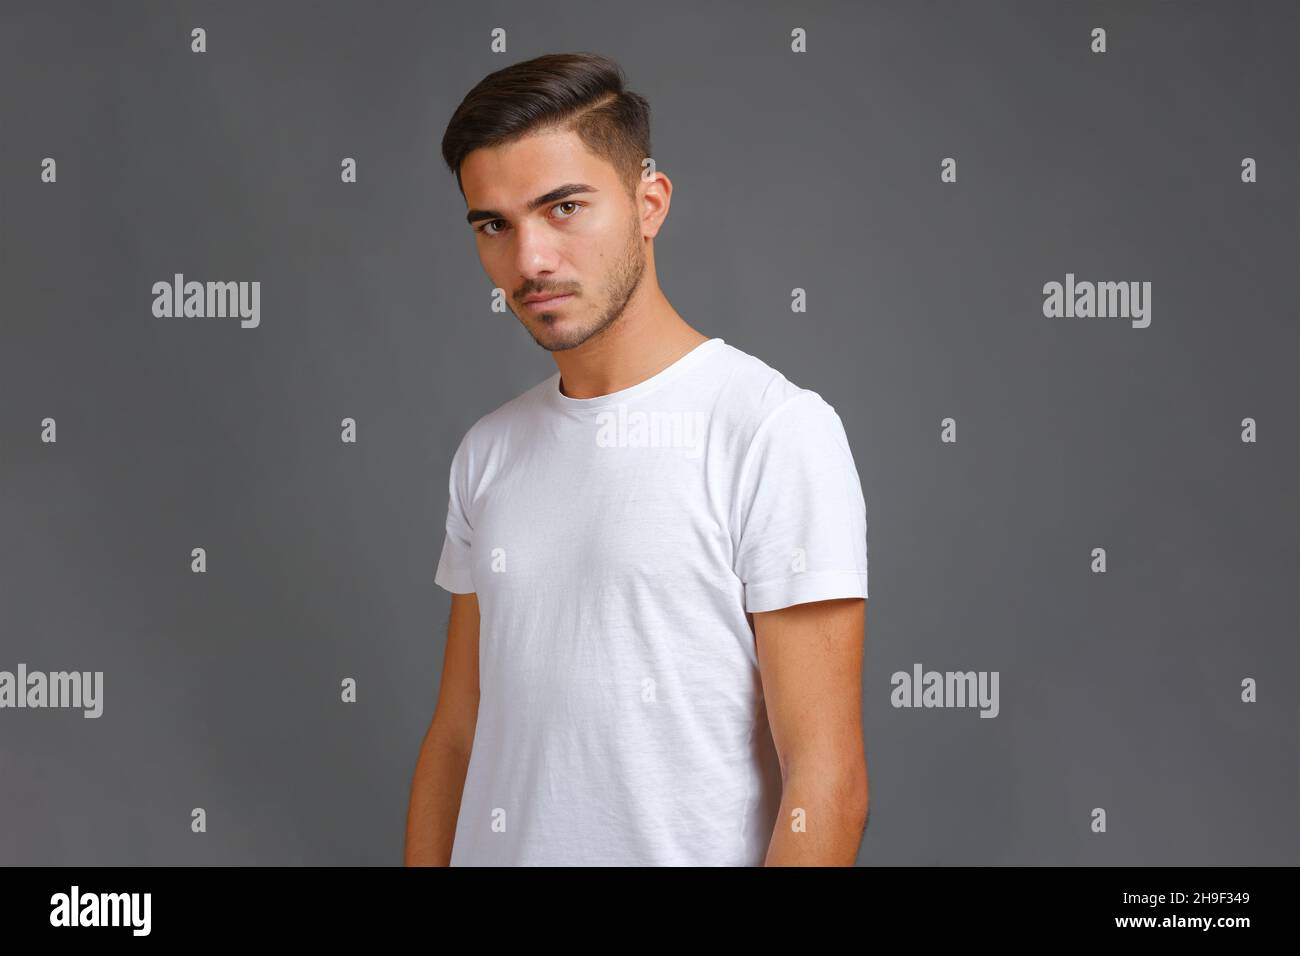 Portrait of serious young man in white t-shirt Stock Photo